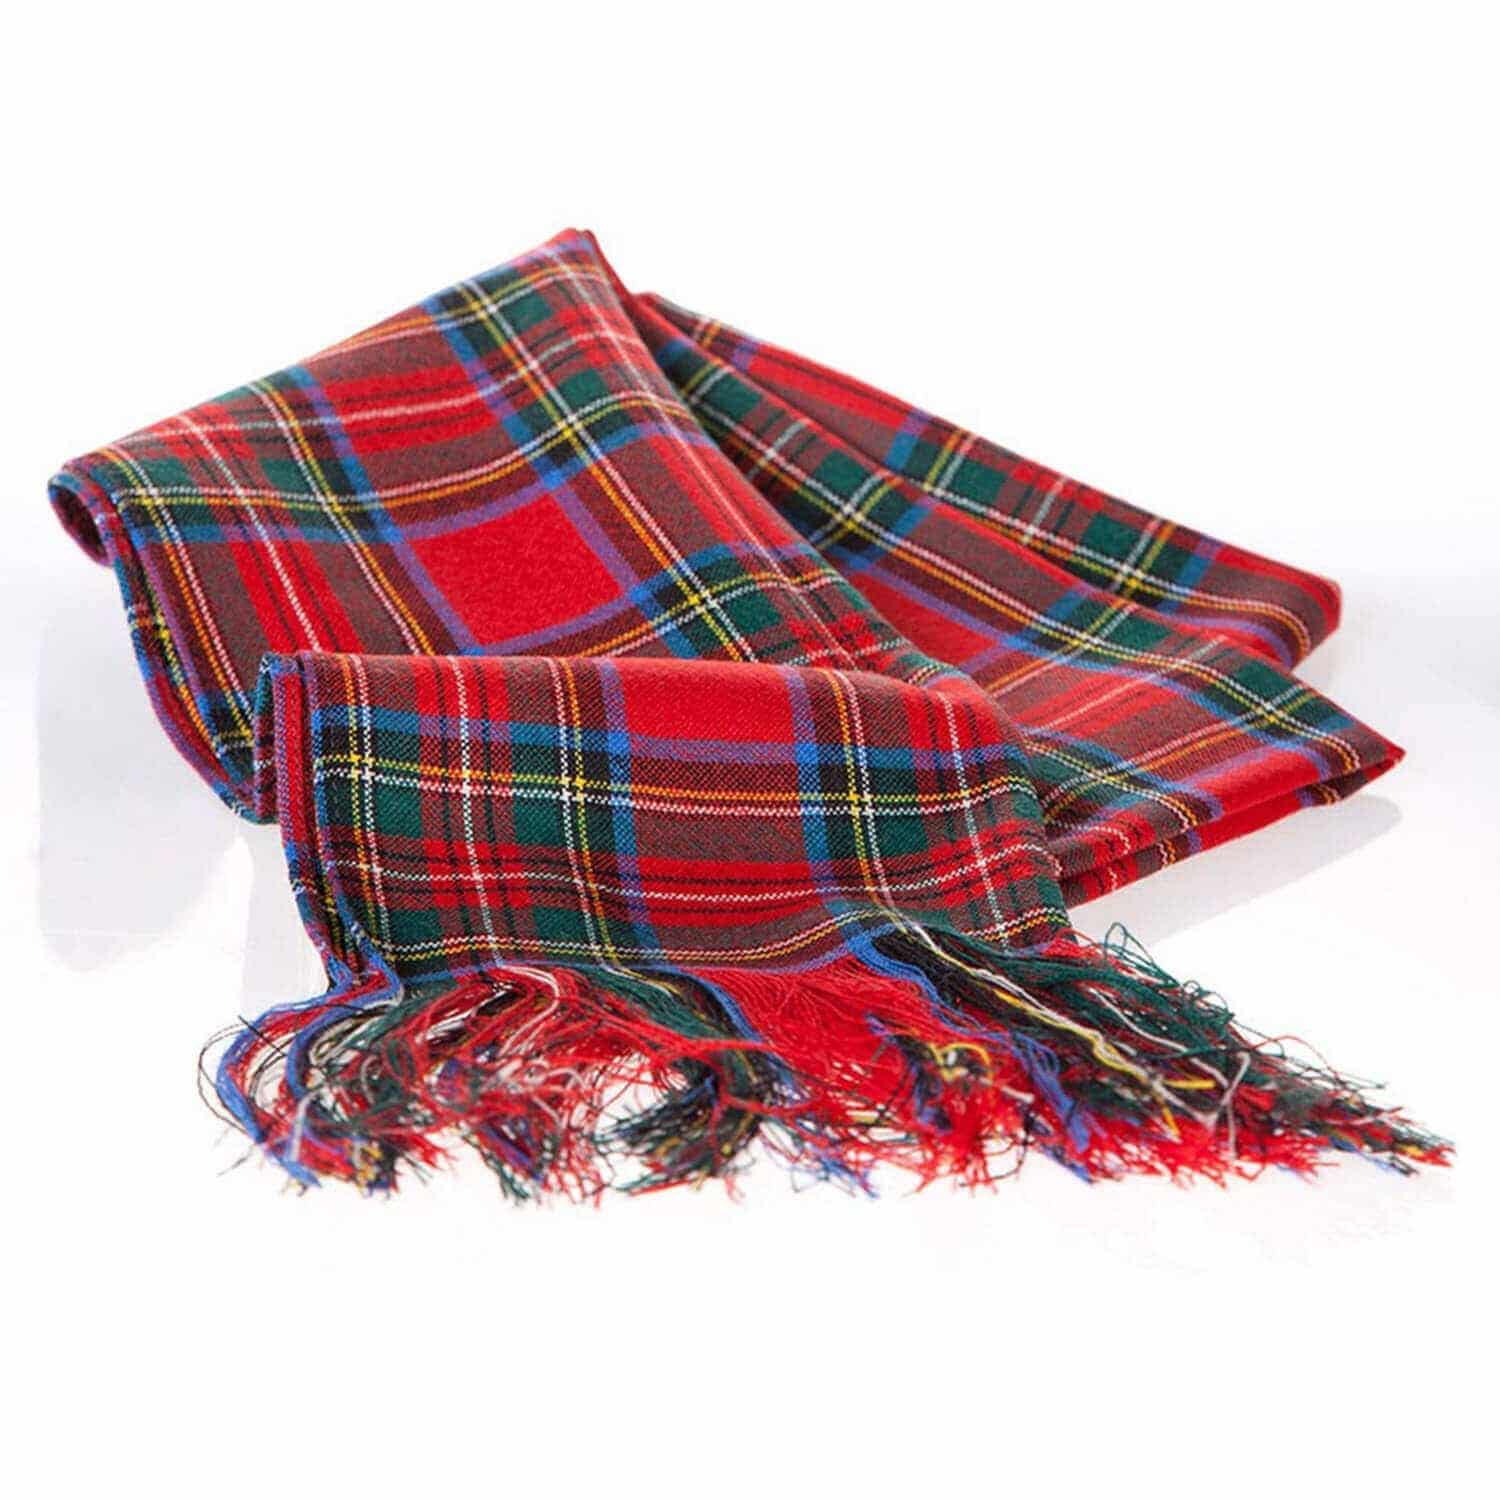 The Right to Go Left — Ladies' Tartan Sashes, by Rev. Mr. Matthew Newsome